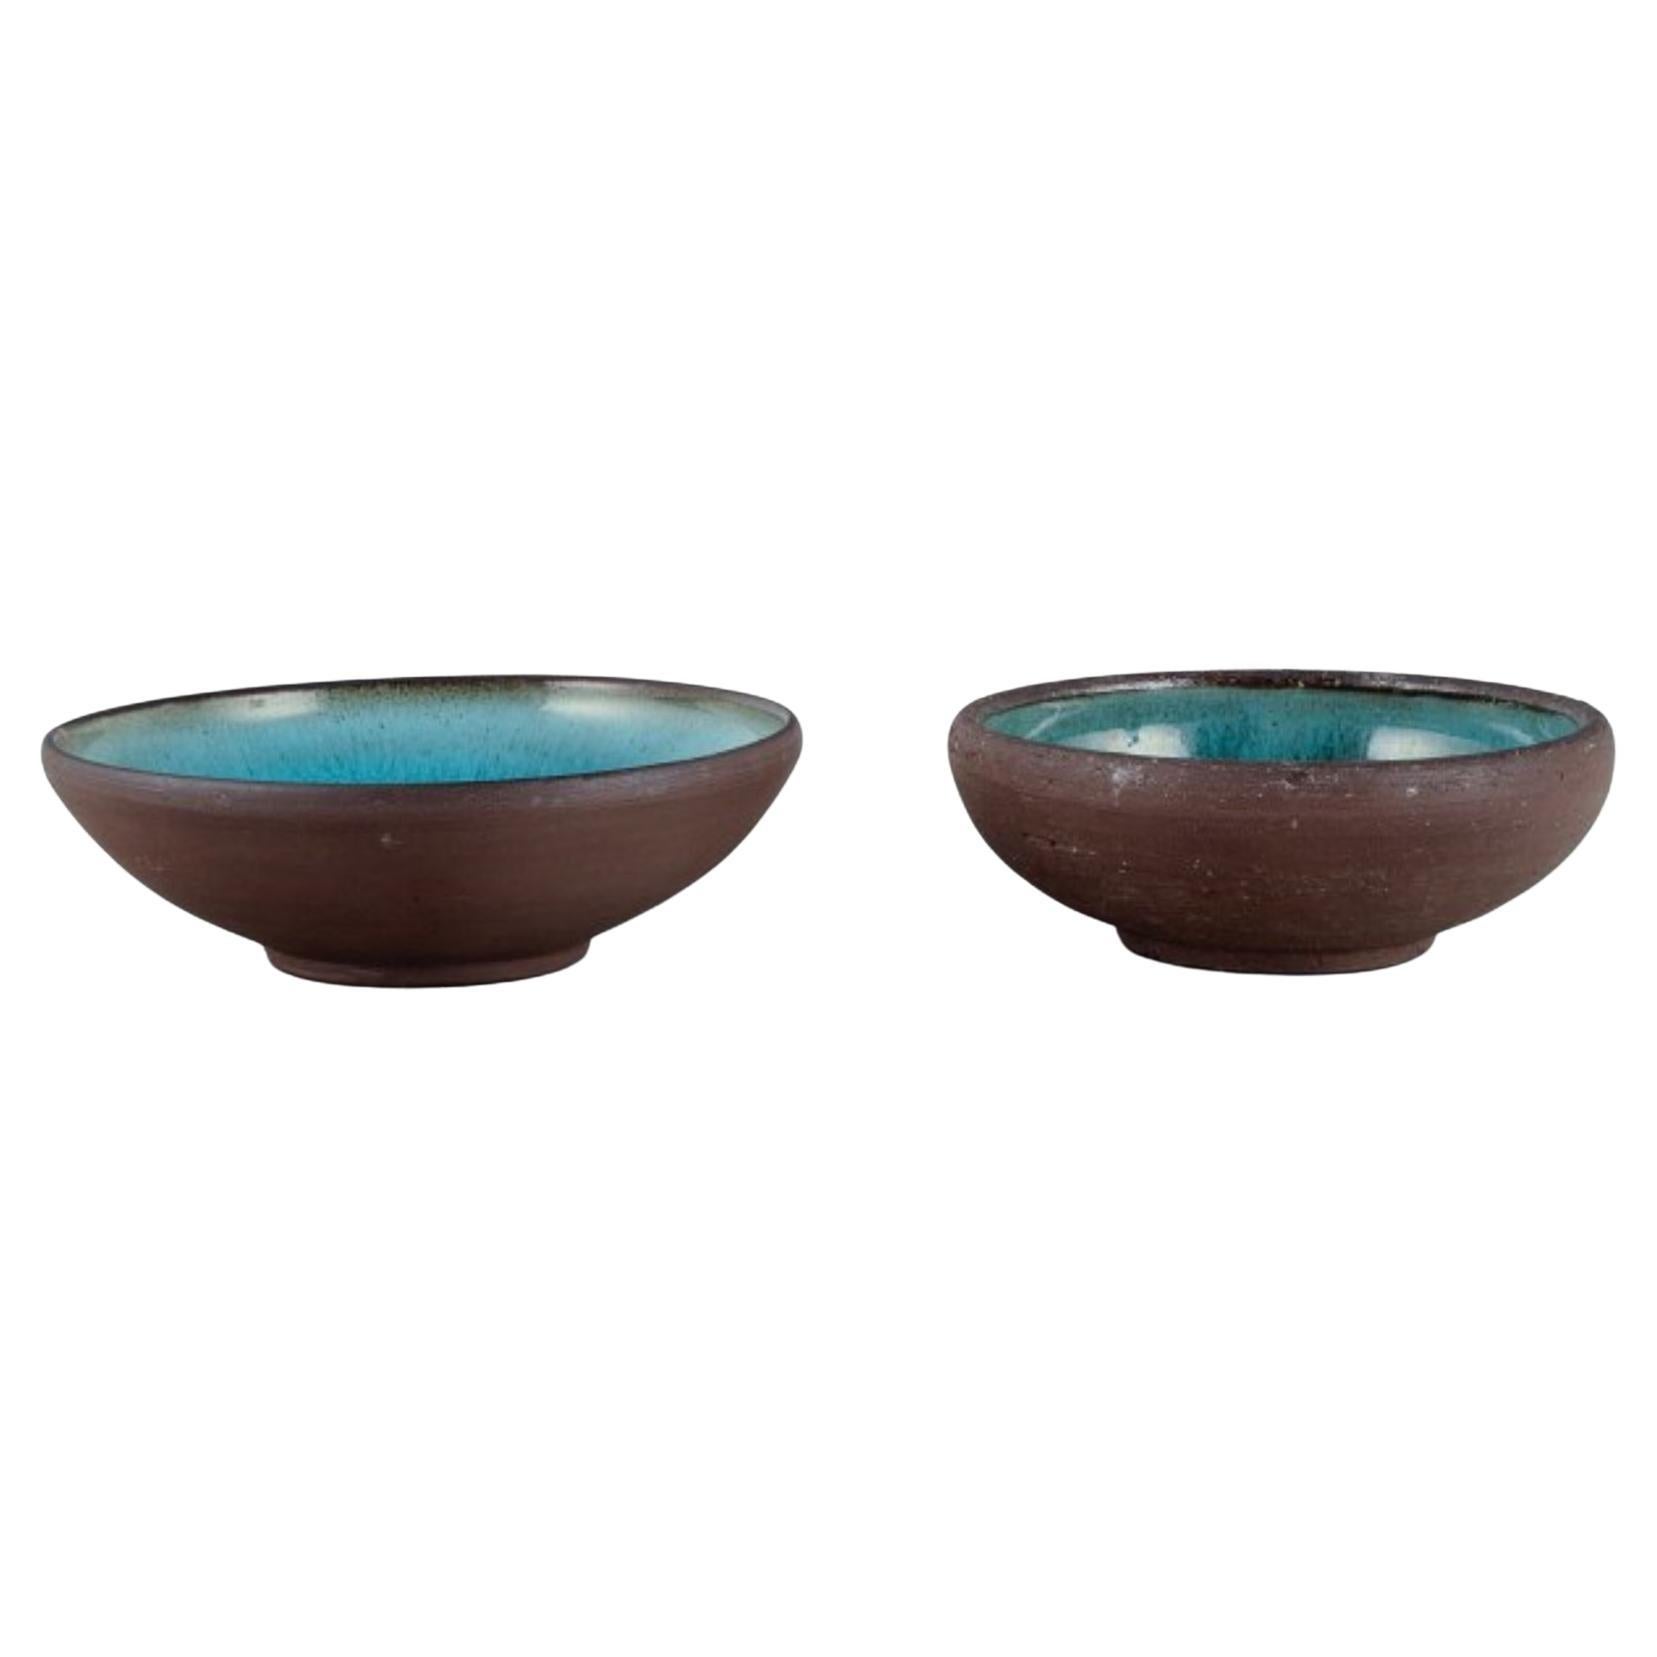 OSA, Denmark.
Two small retro unique ceramic bowls with glaze in turquoise tones.
1970s.
In perfect condition.
Largest measurement: D 14.0 x H 4.5 cm.

OSA was a collaboration between Aase Feilberg, Chr. Frederiksen and Gutte Eriksen.